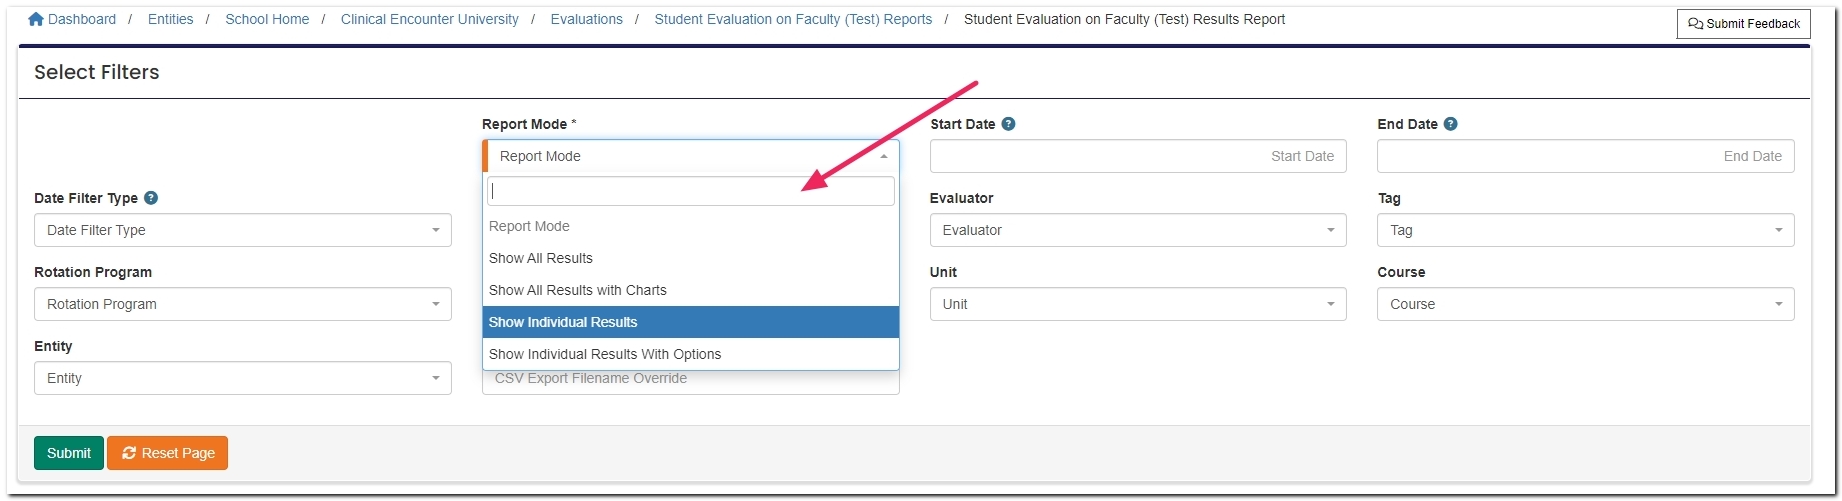 evaluations report filters highlighting Report Mode select field